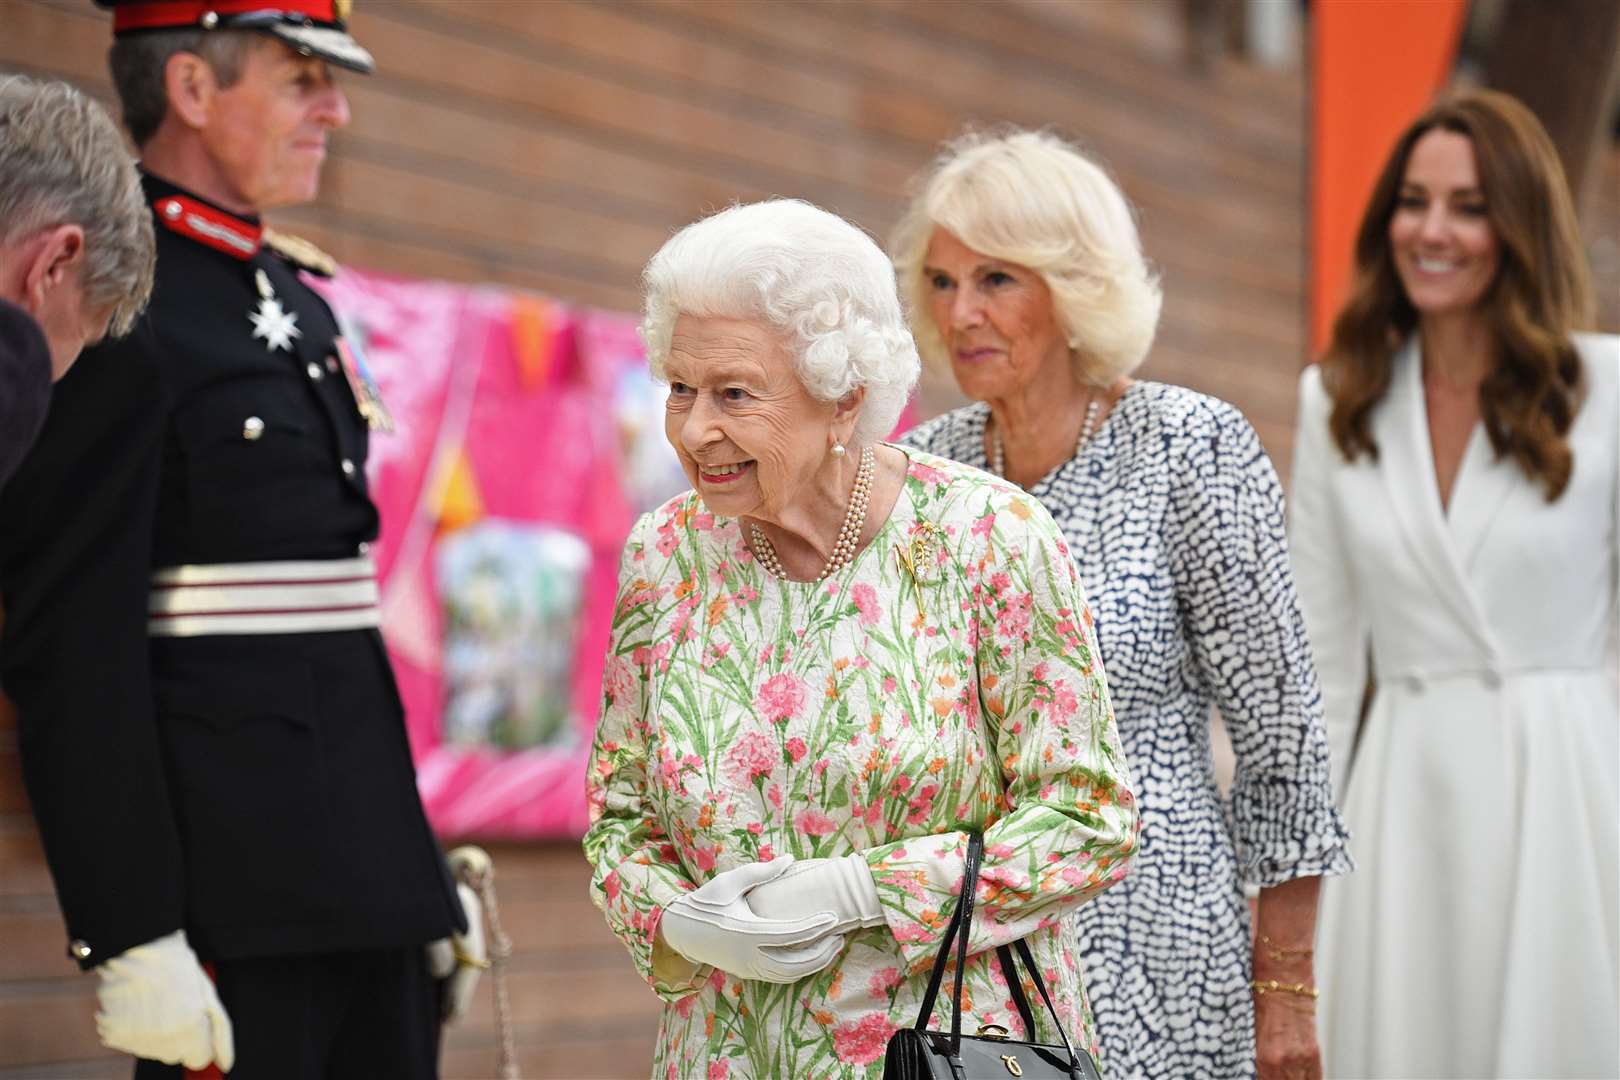 The Queen, the Duchess of Cornwall and the Duchess of Cambridge attend an event at the Eden Project in celebration of The Big Lunch initiative during the G7 summit in Cornwall (Oli Scarff/PA)